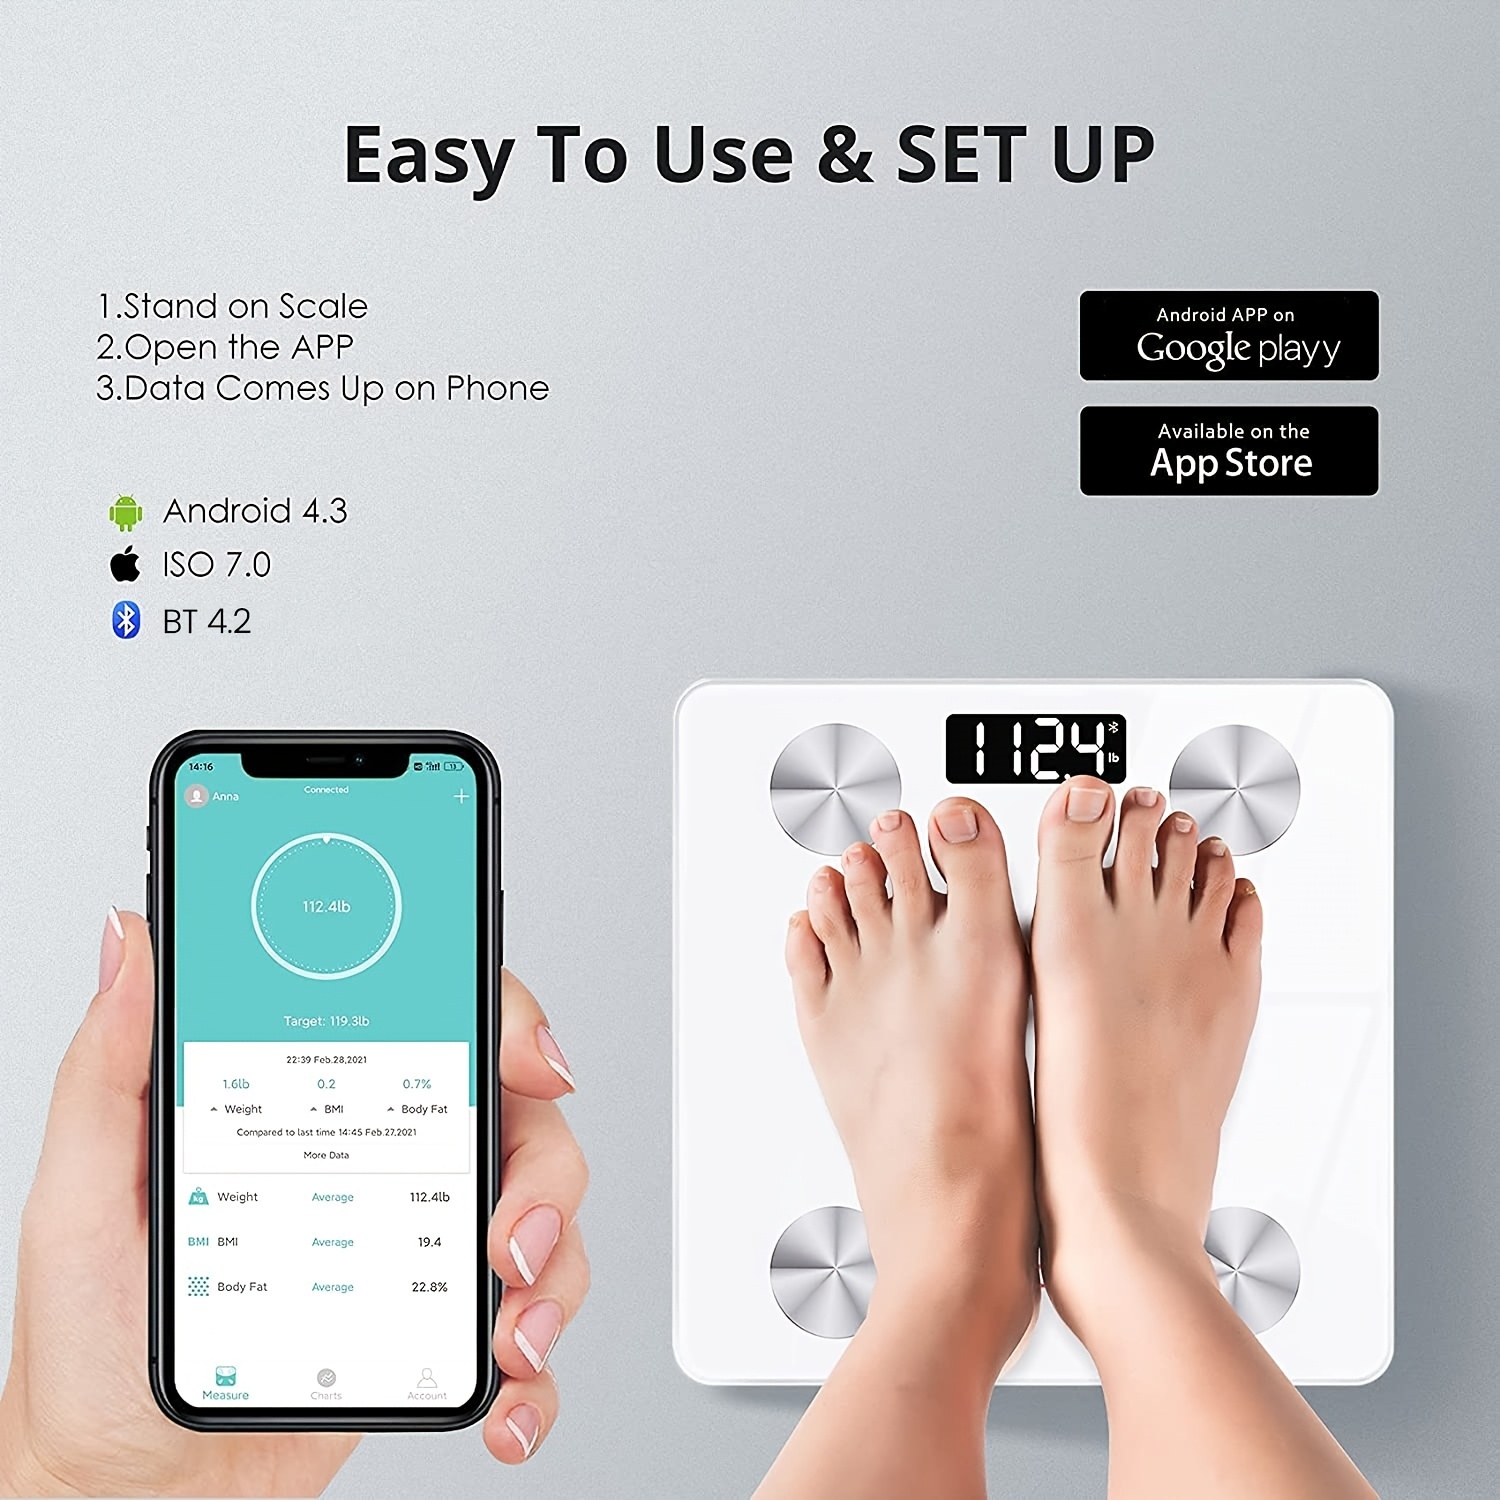 Smart BMI Digital Scale - Measure Weight and Body Fat - Most